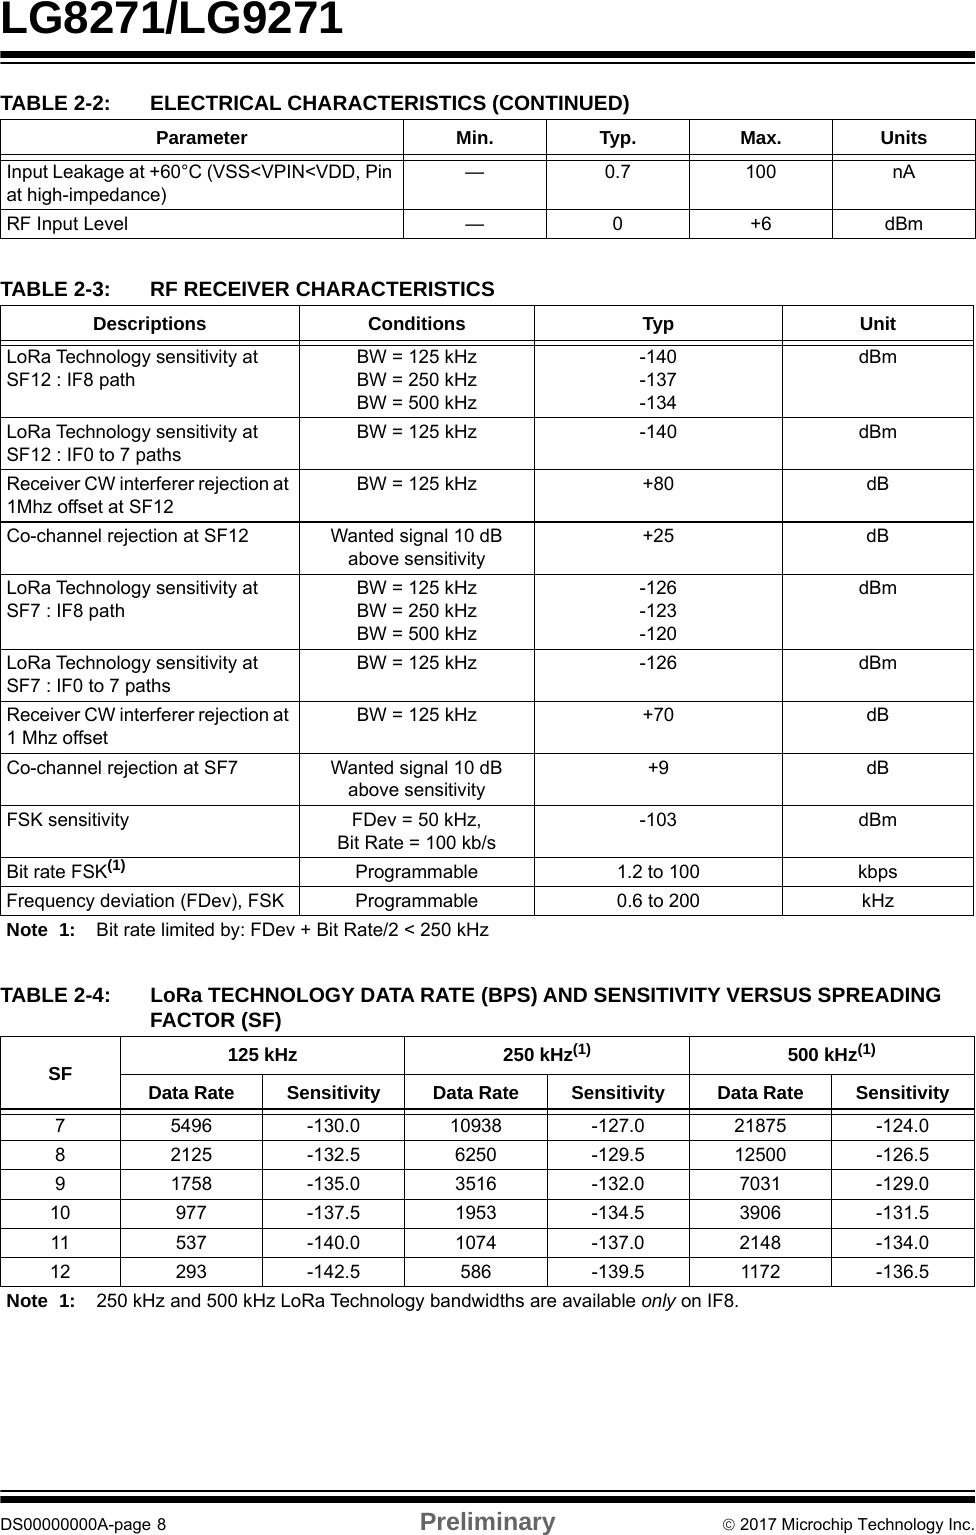 LG8271/LG9271DS00000000A-page 8 Preliminary  2017 Microchip Technology Inc.Input Leakage at +60°C (VSS&lt;VPIN&lt;VDD, Pin at high-impedance)—0.7100nARF Input Level  — 0 +6 dBmTABLE 2-2: ELECTRICAL CHARACTERISTICS (CONTINUED)Parameter Min. Typ. Max. UnitsTABLE 2-3: RF RECEIVER CHARACTERISTICSDescriptions Conditions Typ UnitLoRa Technology sensitivity at SF12 : IF8 path BW = 125 kHzBW = 250 kHzBW = 500 kHz-140-137-134dBmLoRa Technology sensitivity at SF12 : IF0 to 7 paths BW = 125 kHz  -140  dBm Receiver CW interferer rejection at 1Mhz offset at SF12 BW = 125 kHz  +80  dB Co-channel rejection at SF12  Wanted signal 10 dB above sensitivity +25 dB LoRa Technology sensitivity at SF7 : IF8 path BW = 125 kHzBW = 250 kHzBW = 500 kHz -126-123-120dBmLoRa Technology sensitivity at SF7 : IF0 to 7 paths BW = 125 kHz  -126  dBm Receiver CW interferer rejection at 1 Mhz offset BW = 125 kHz  +70  dB Co-channel rejection at SF7  Wanted signal 10 dB above sensitivity +9 dB FSK sensitivity  FDev = 50 kHz, Bit Rate = 100 kb/s-103 dBmBit rate FSK(1) Programmable 1.2 to 100 kbpsFrequency deviation (FDev), FSK  Programmable  0.6 to 200  kHz Note 1: Bit rate limited by: FDev + Bit Rate/2 &lt; 250 kHzTABLE 2-4: LoRa TECHNOLOGY DATA RATE (BPS) AND SENSITIVITY VERSUS SPREADING FACTOR (SF)SF 125 kHz 250 kHz(1) 500 kHz(1)Data Rate Sensitivity Data Rate Sensitivity Data Rate Sensitivity7 5496 -130.0 10938 -127.0 21875 -124.08 2125 -132.5 6250 -129.5 12500 -126.59 1758 -135.0 3516 -132.0 7031 -129.010 977 -137.5 1953 -134.5 3906 -131.511 537 -140.0 1074 -137.0 2148 -134.012 293 -142.5 586 -139.5 1172 -136.5Note 1: 250 kHz and 500 kHz LoRa Technology bandwidths are available only on IF8.